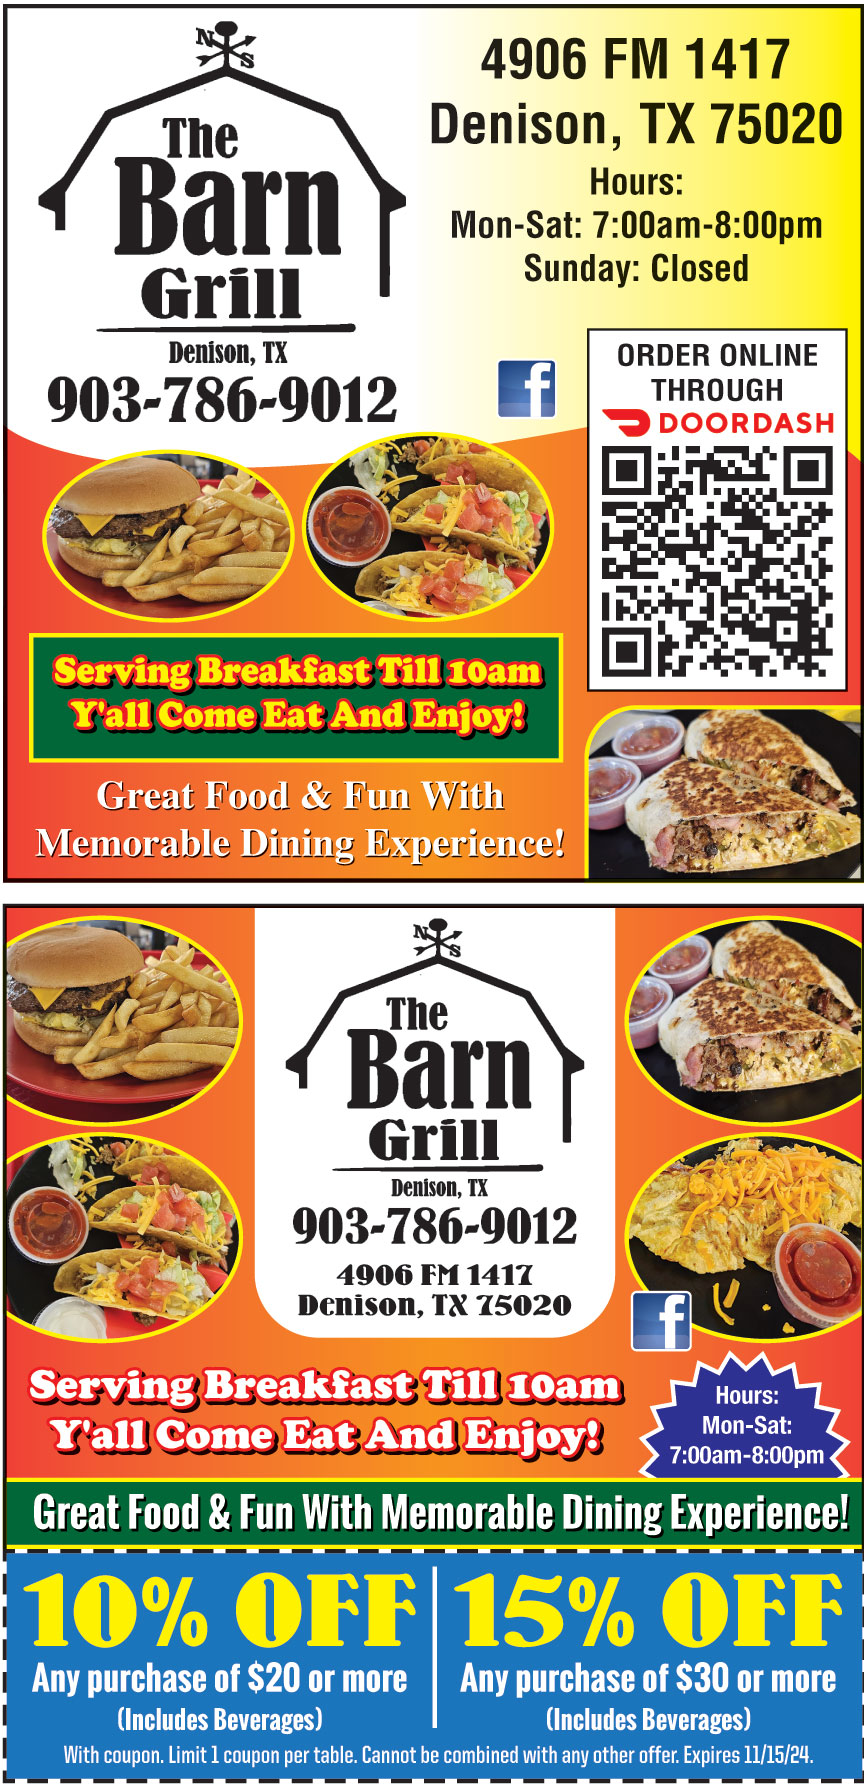 THE BARN GRILL